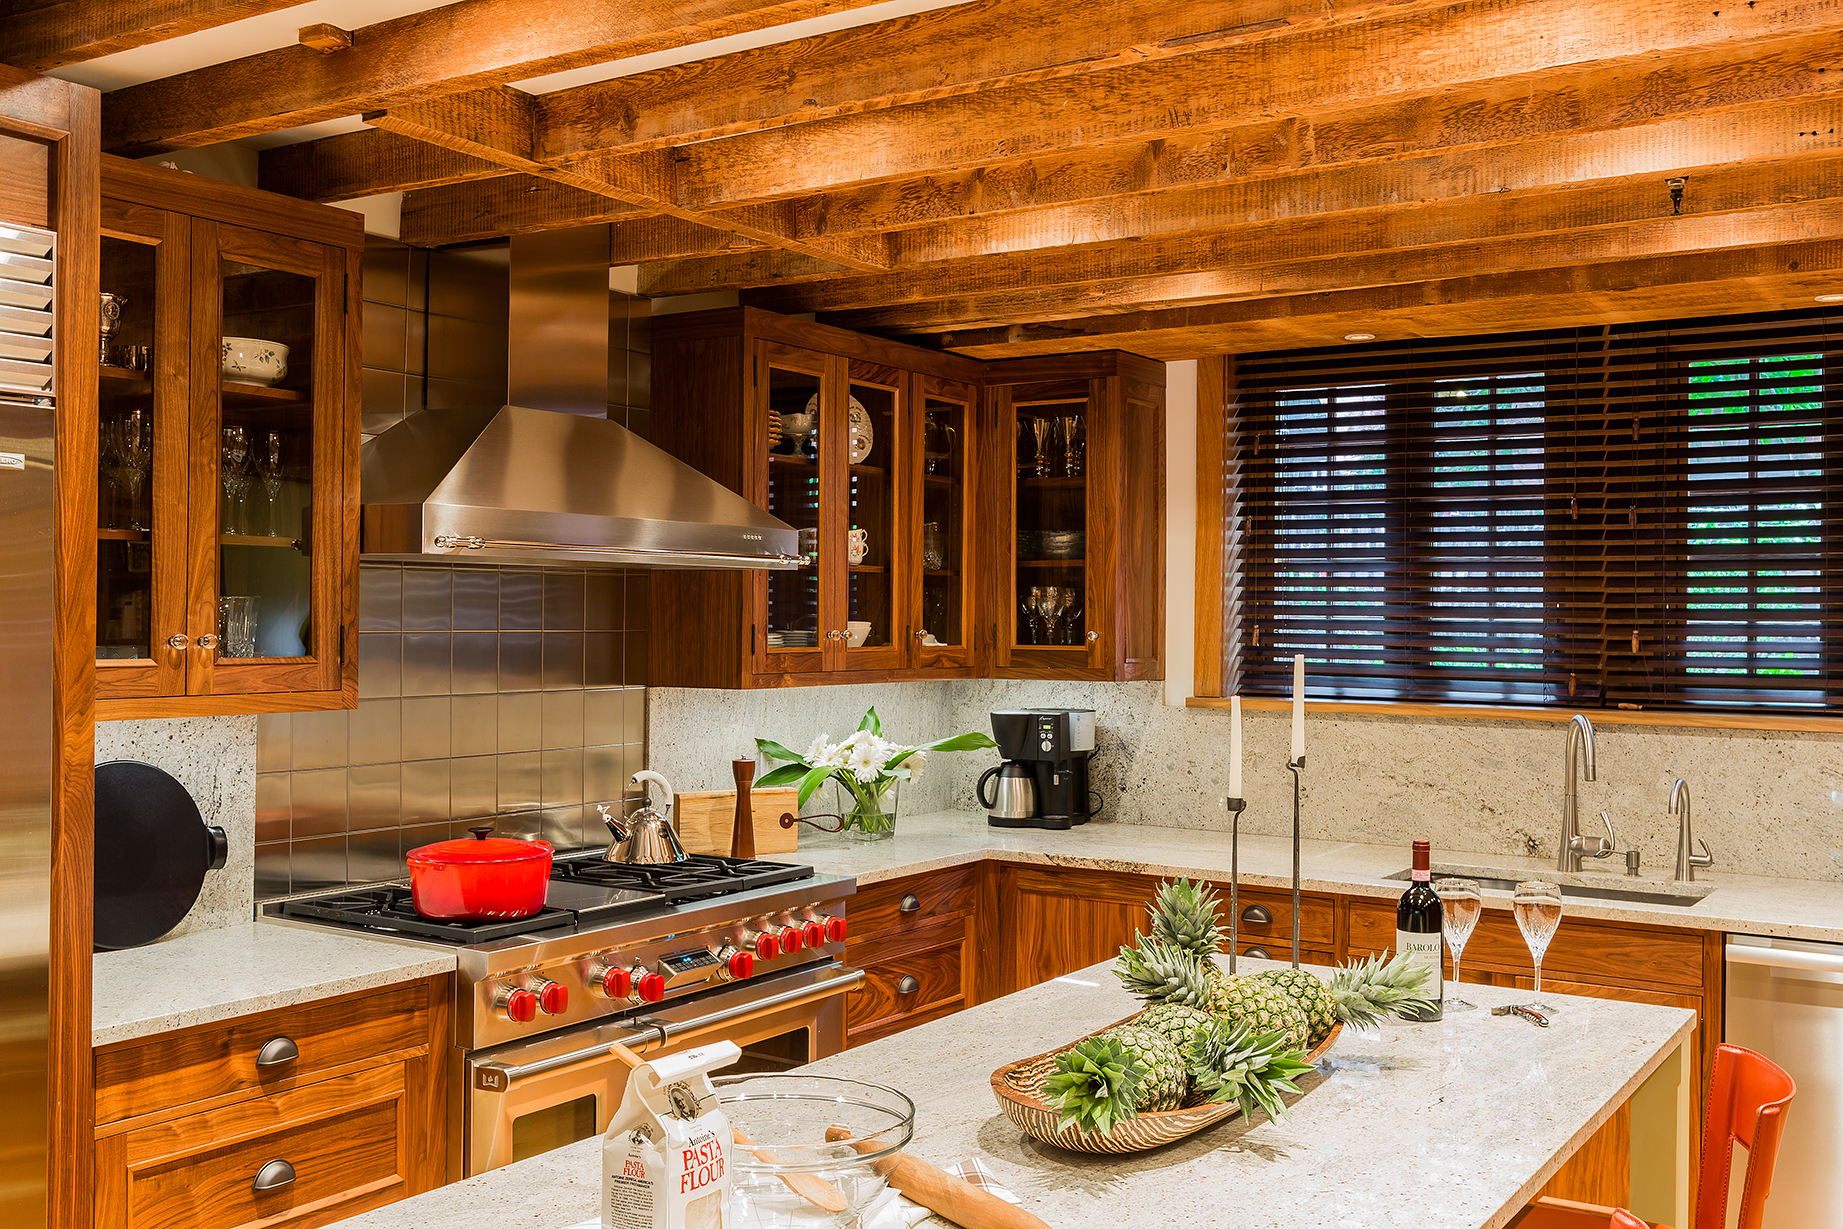   Beacon Hill walnut kitchen with original beams, stainless steel tiles and Kashmir granite.  